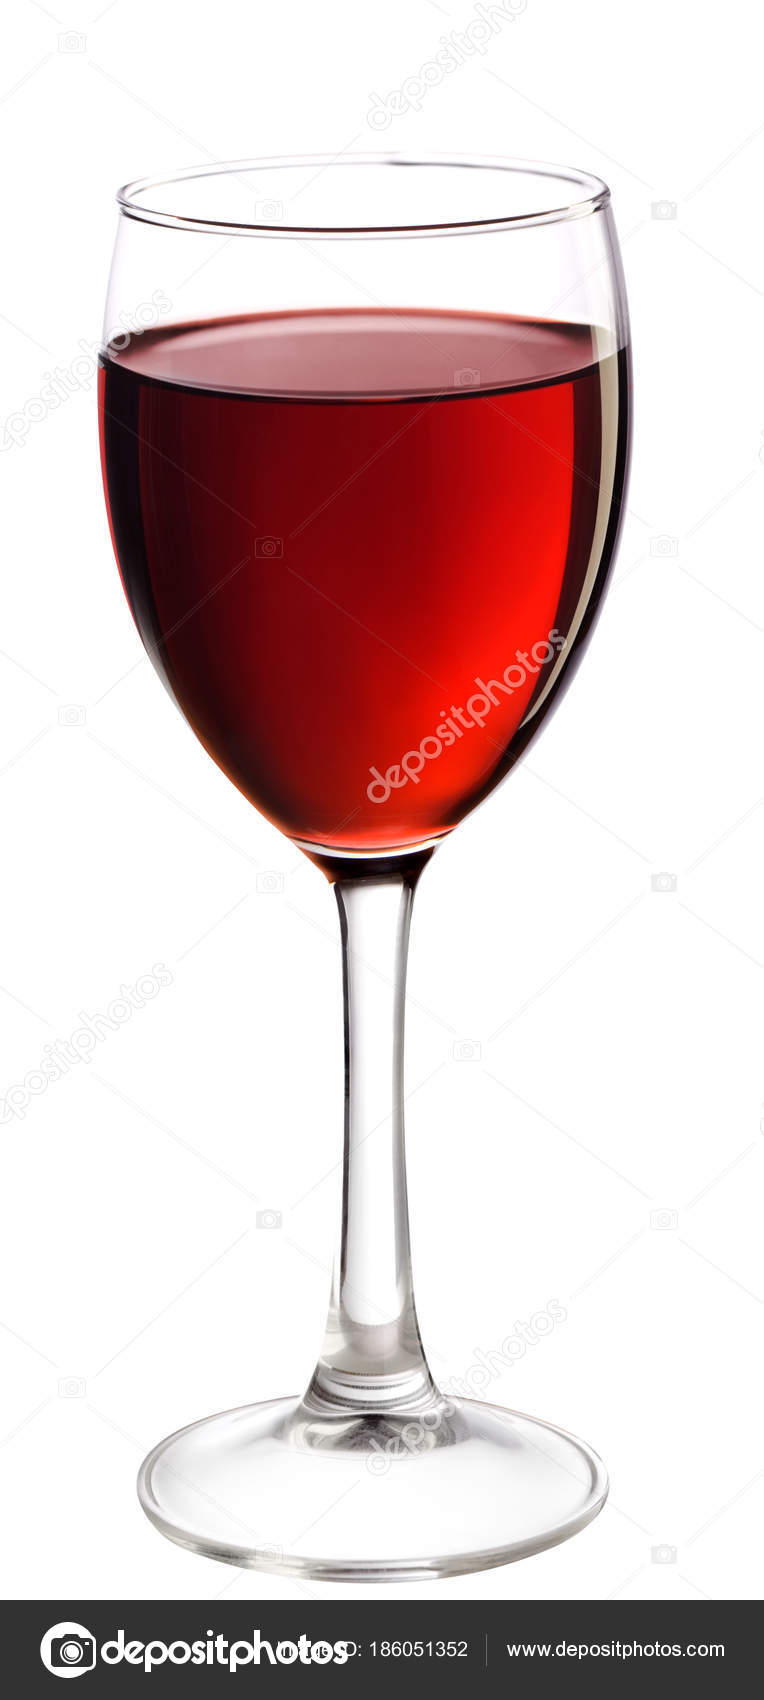 Red Wine Glass Isolated On White Background Stock Photo - Download